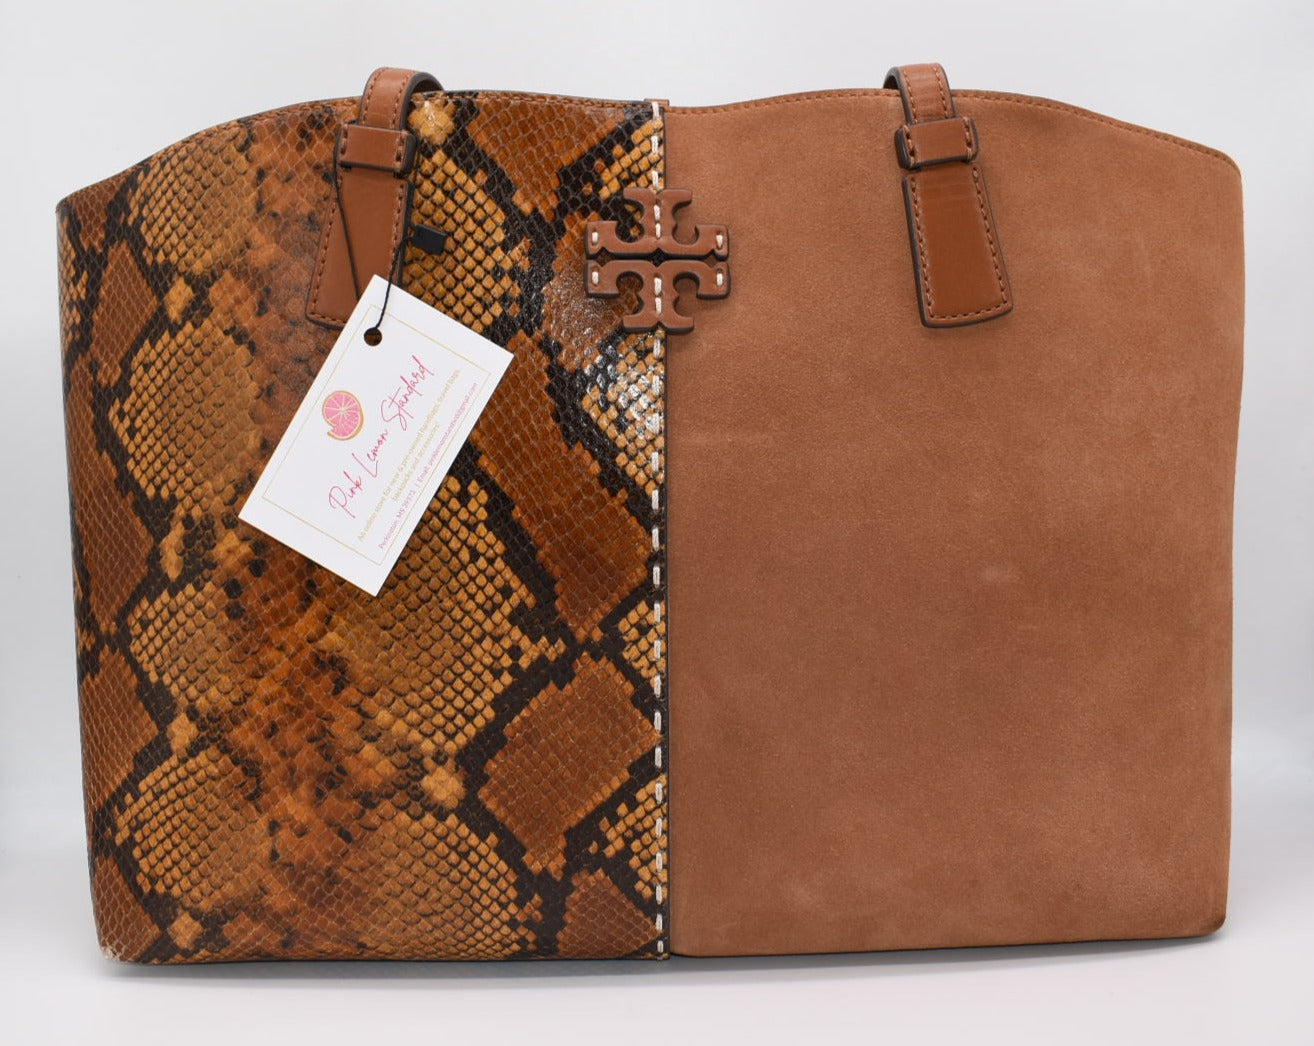 Tory Burch  McGraw Snake-Embossed Leather & Suede Tote in Dark Caramel